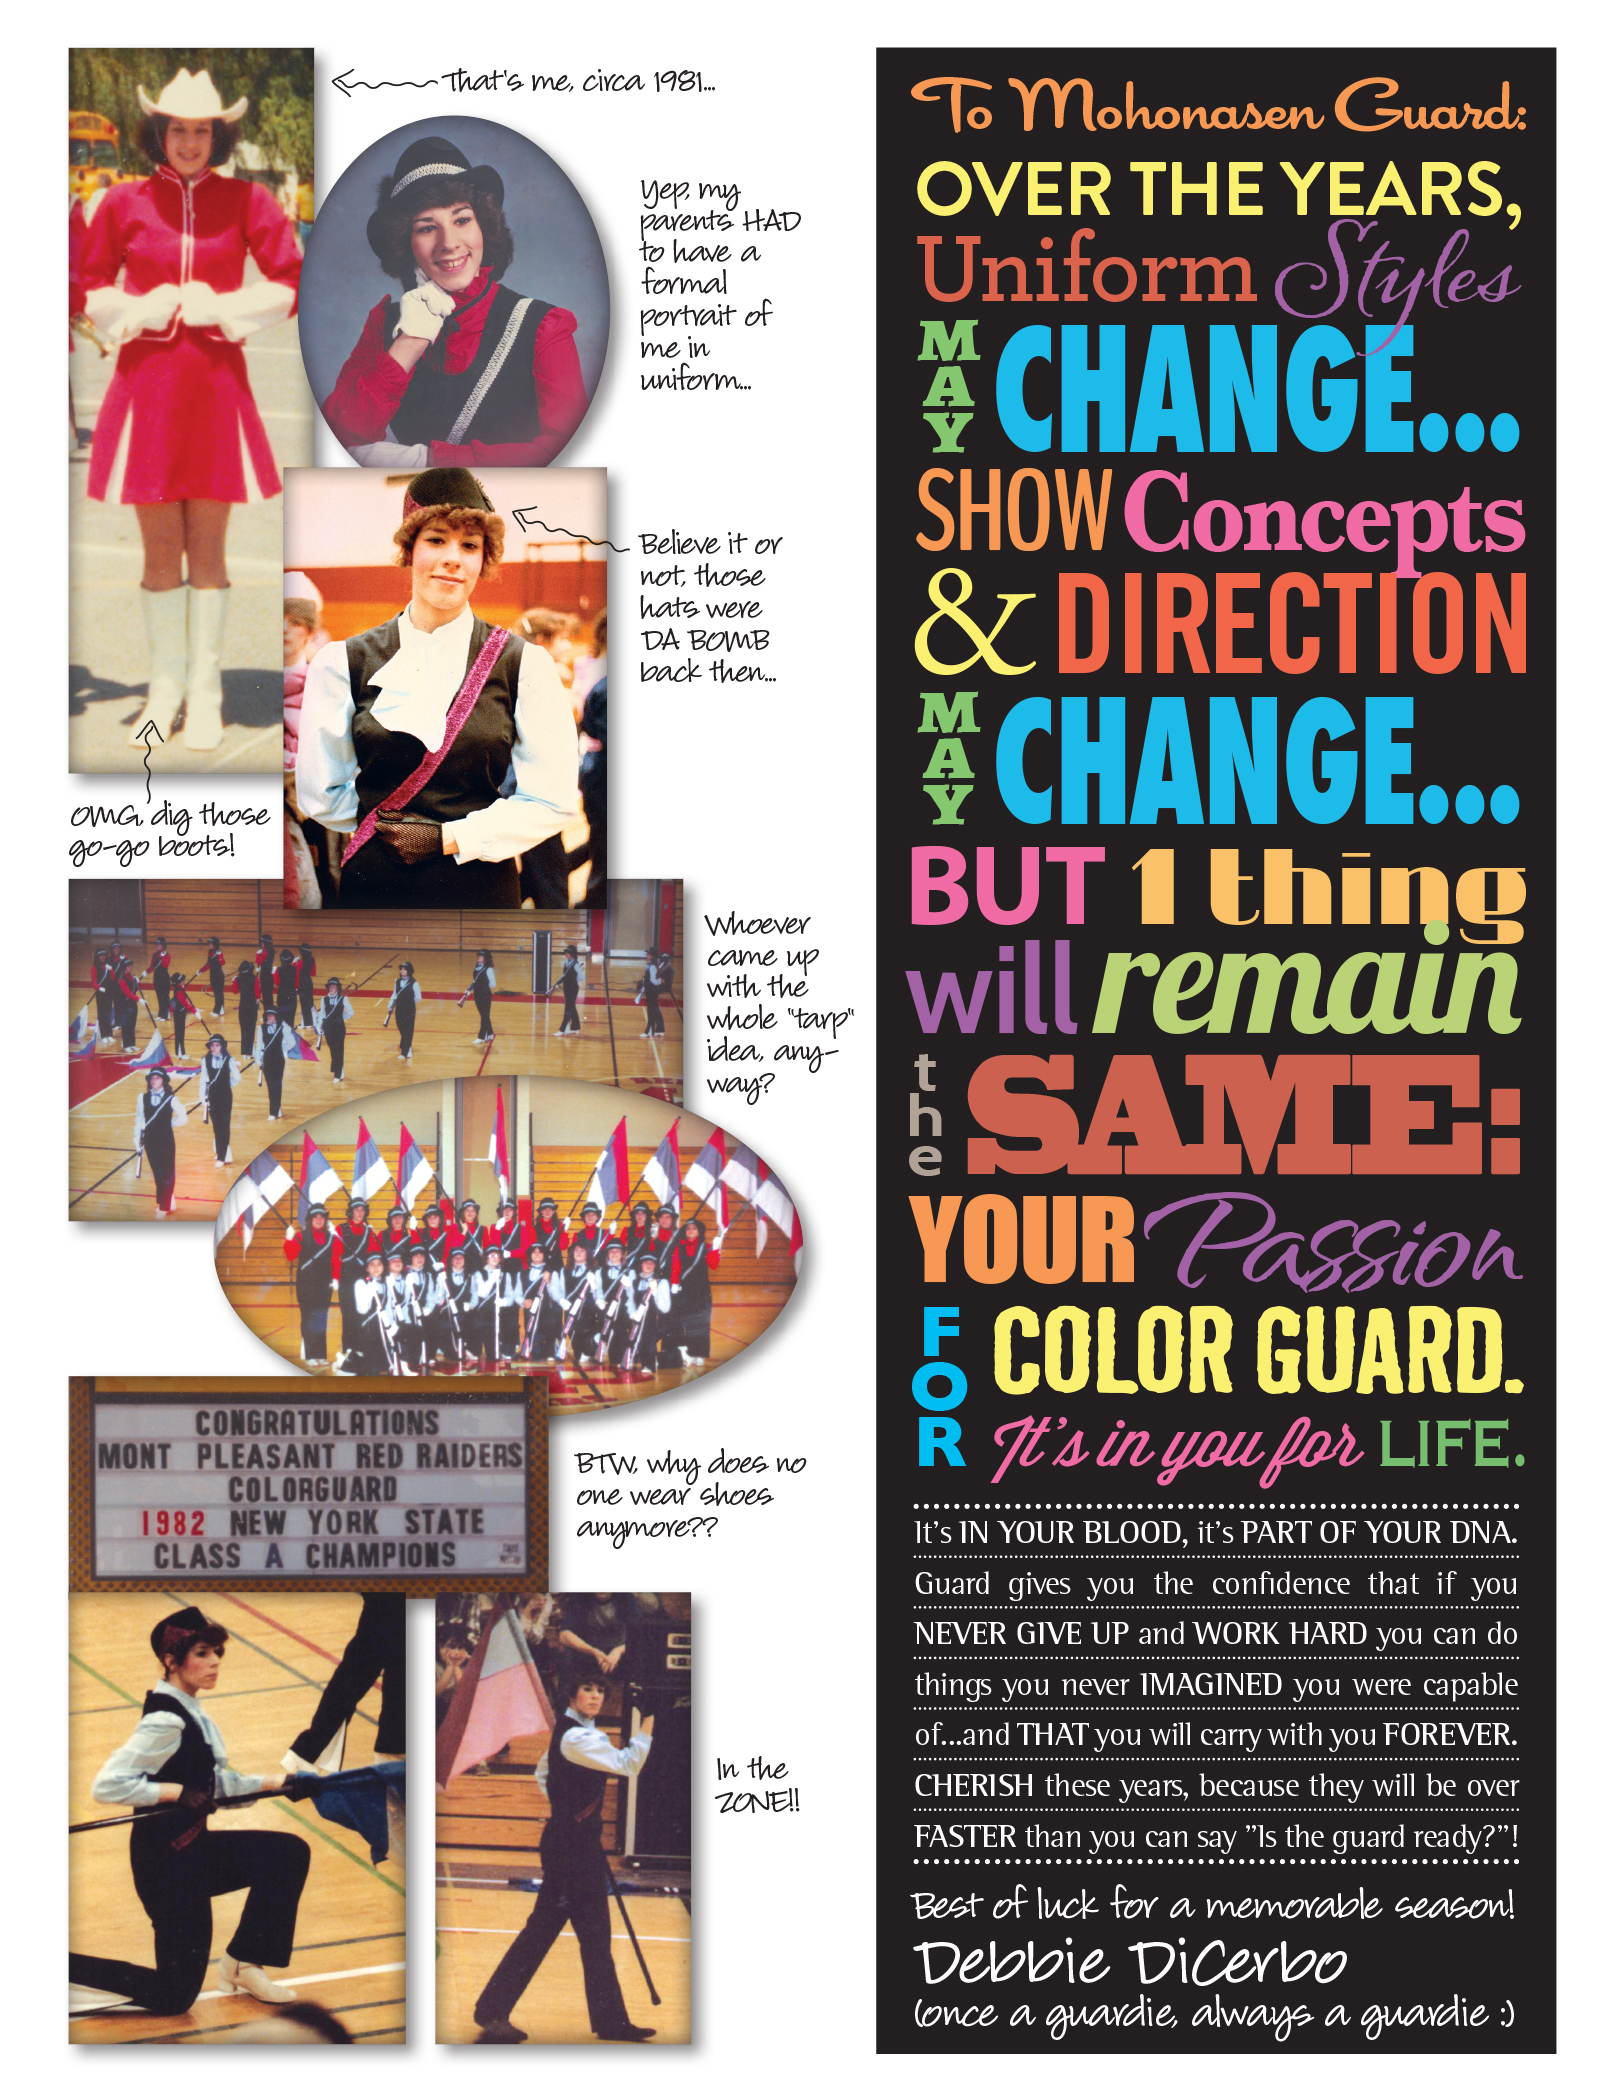  Having been in guard myself in high school, this was something I was extremely passionate about. I wanted to place an inspirational ad from myself to the kids, to illustrate what being in guard had taught me and the lessons I carried throughout life